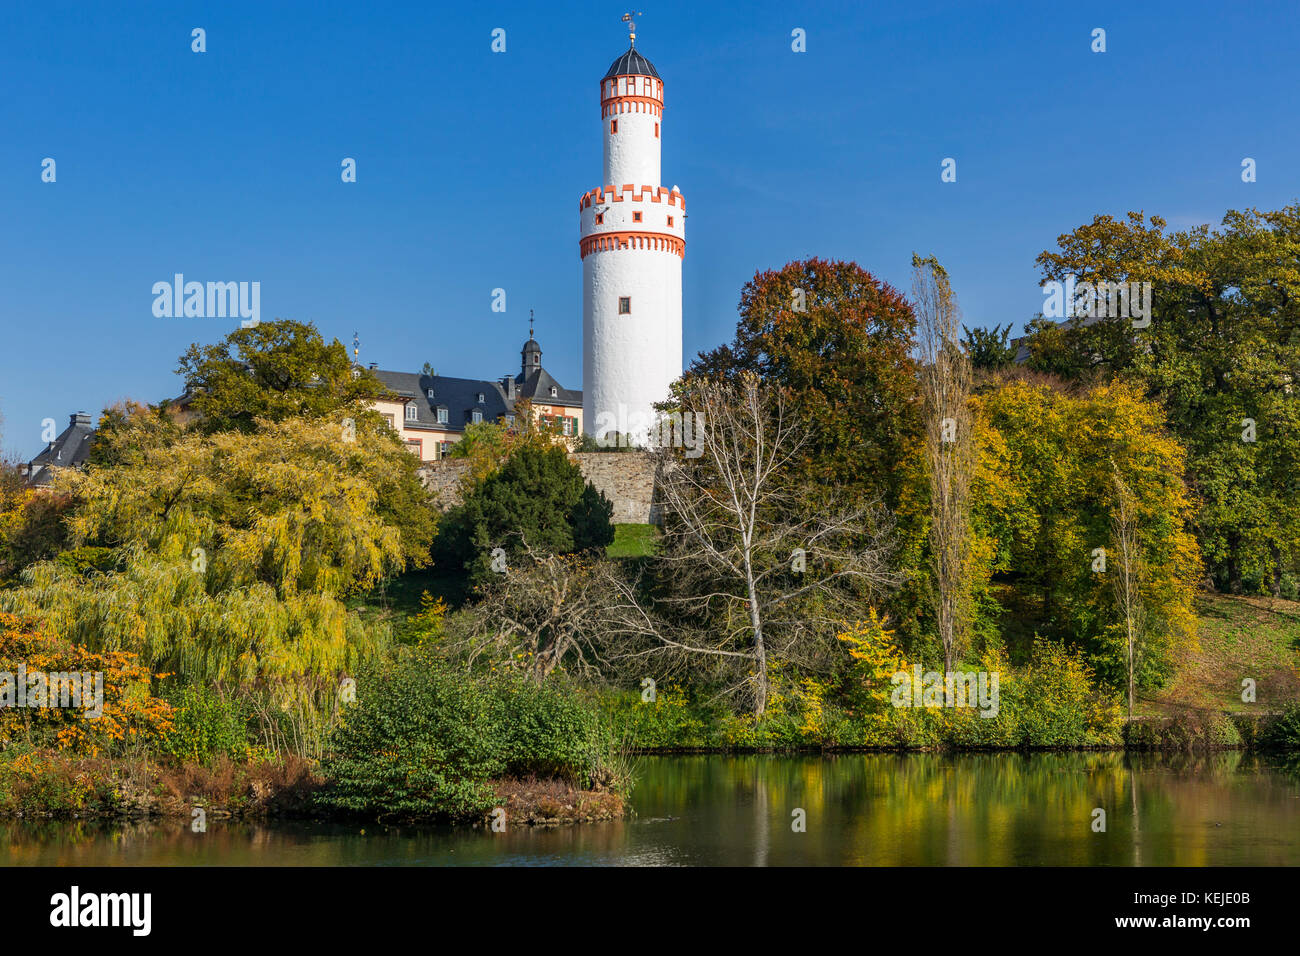 Landgrave's castle with white tower in Bad Homburg vor der Höhe, spa town in Germany Stock Photo